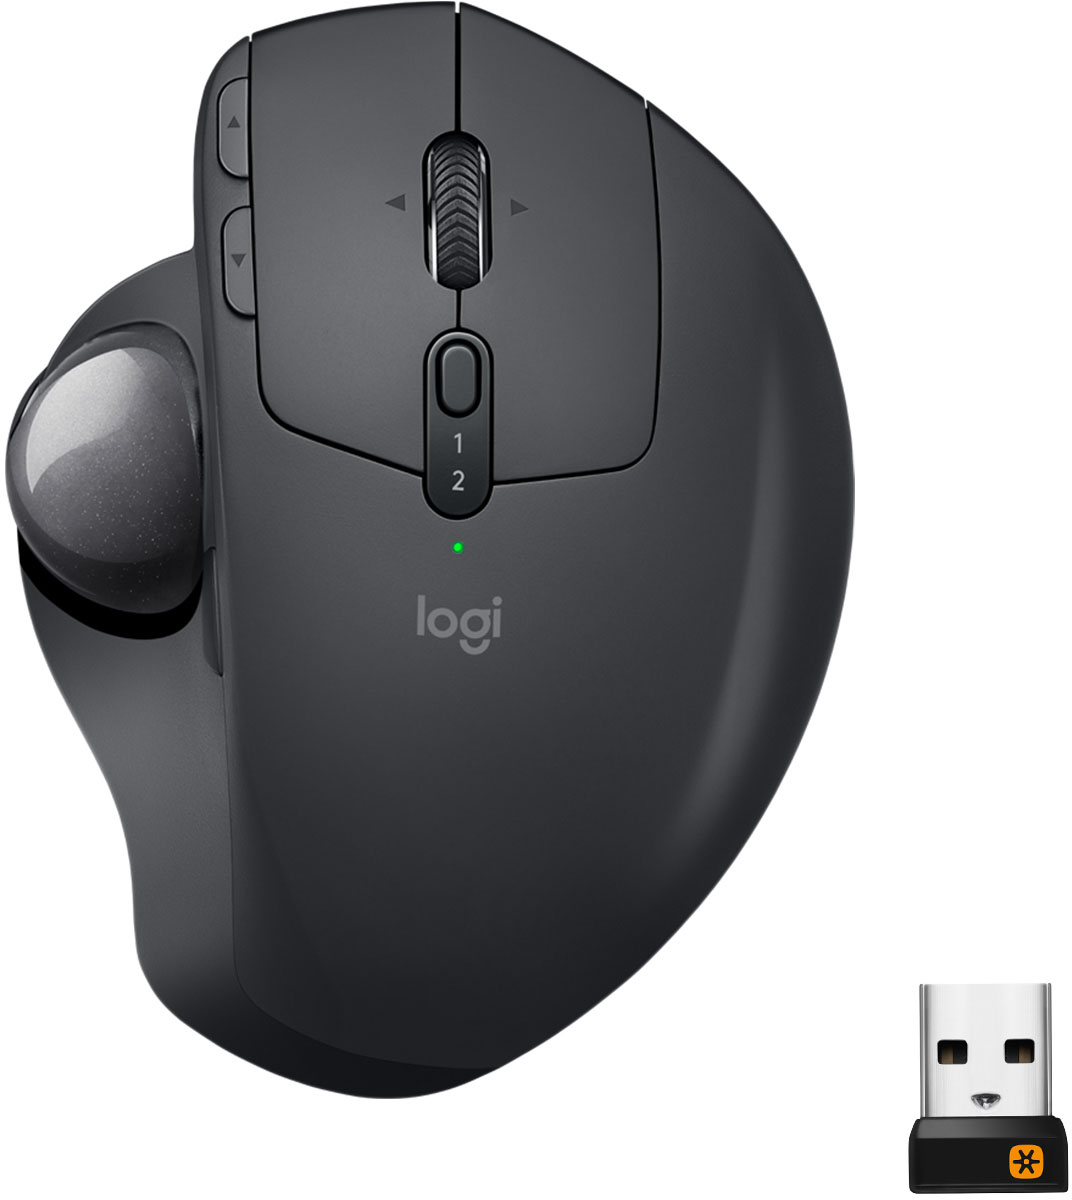 Questions and Answers: Logitech M570 Wireless Trackball Mouse Gray/Blue